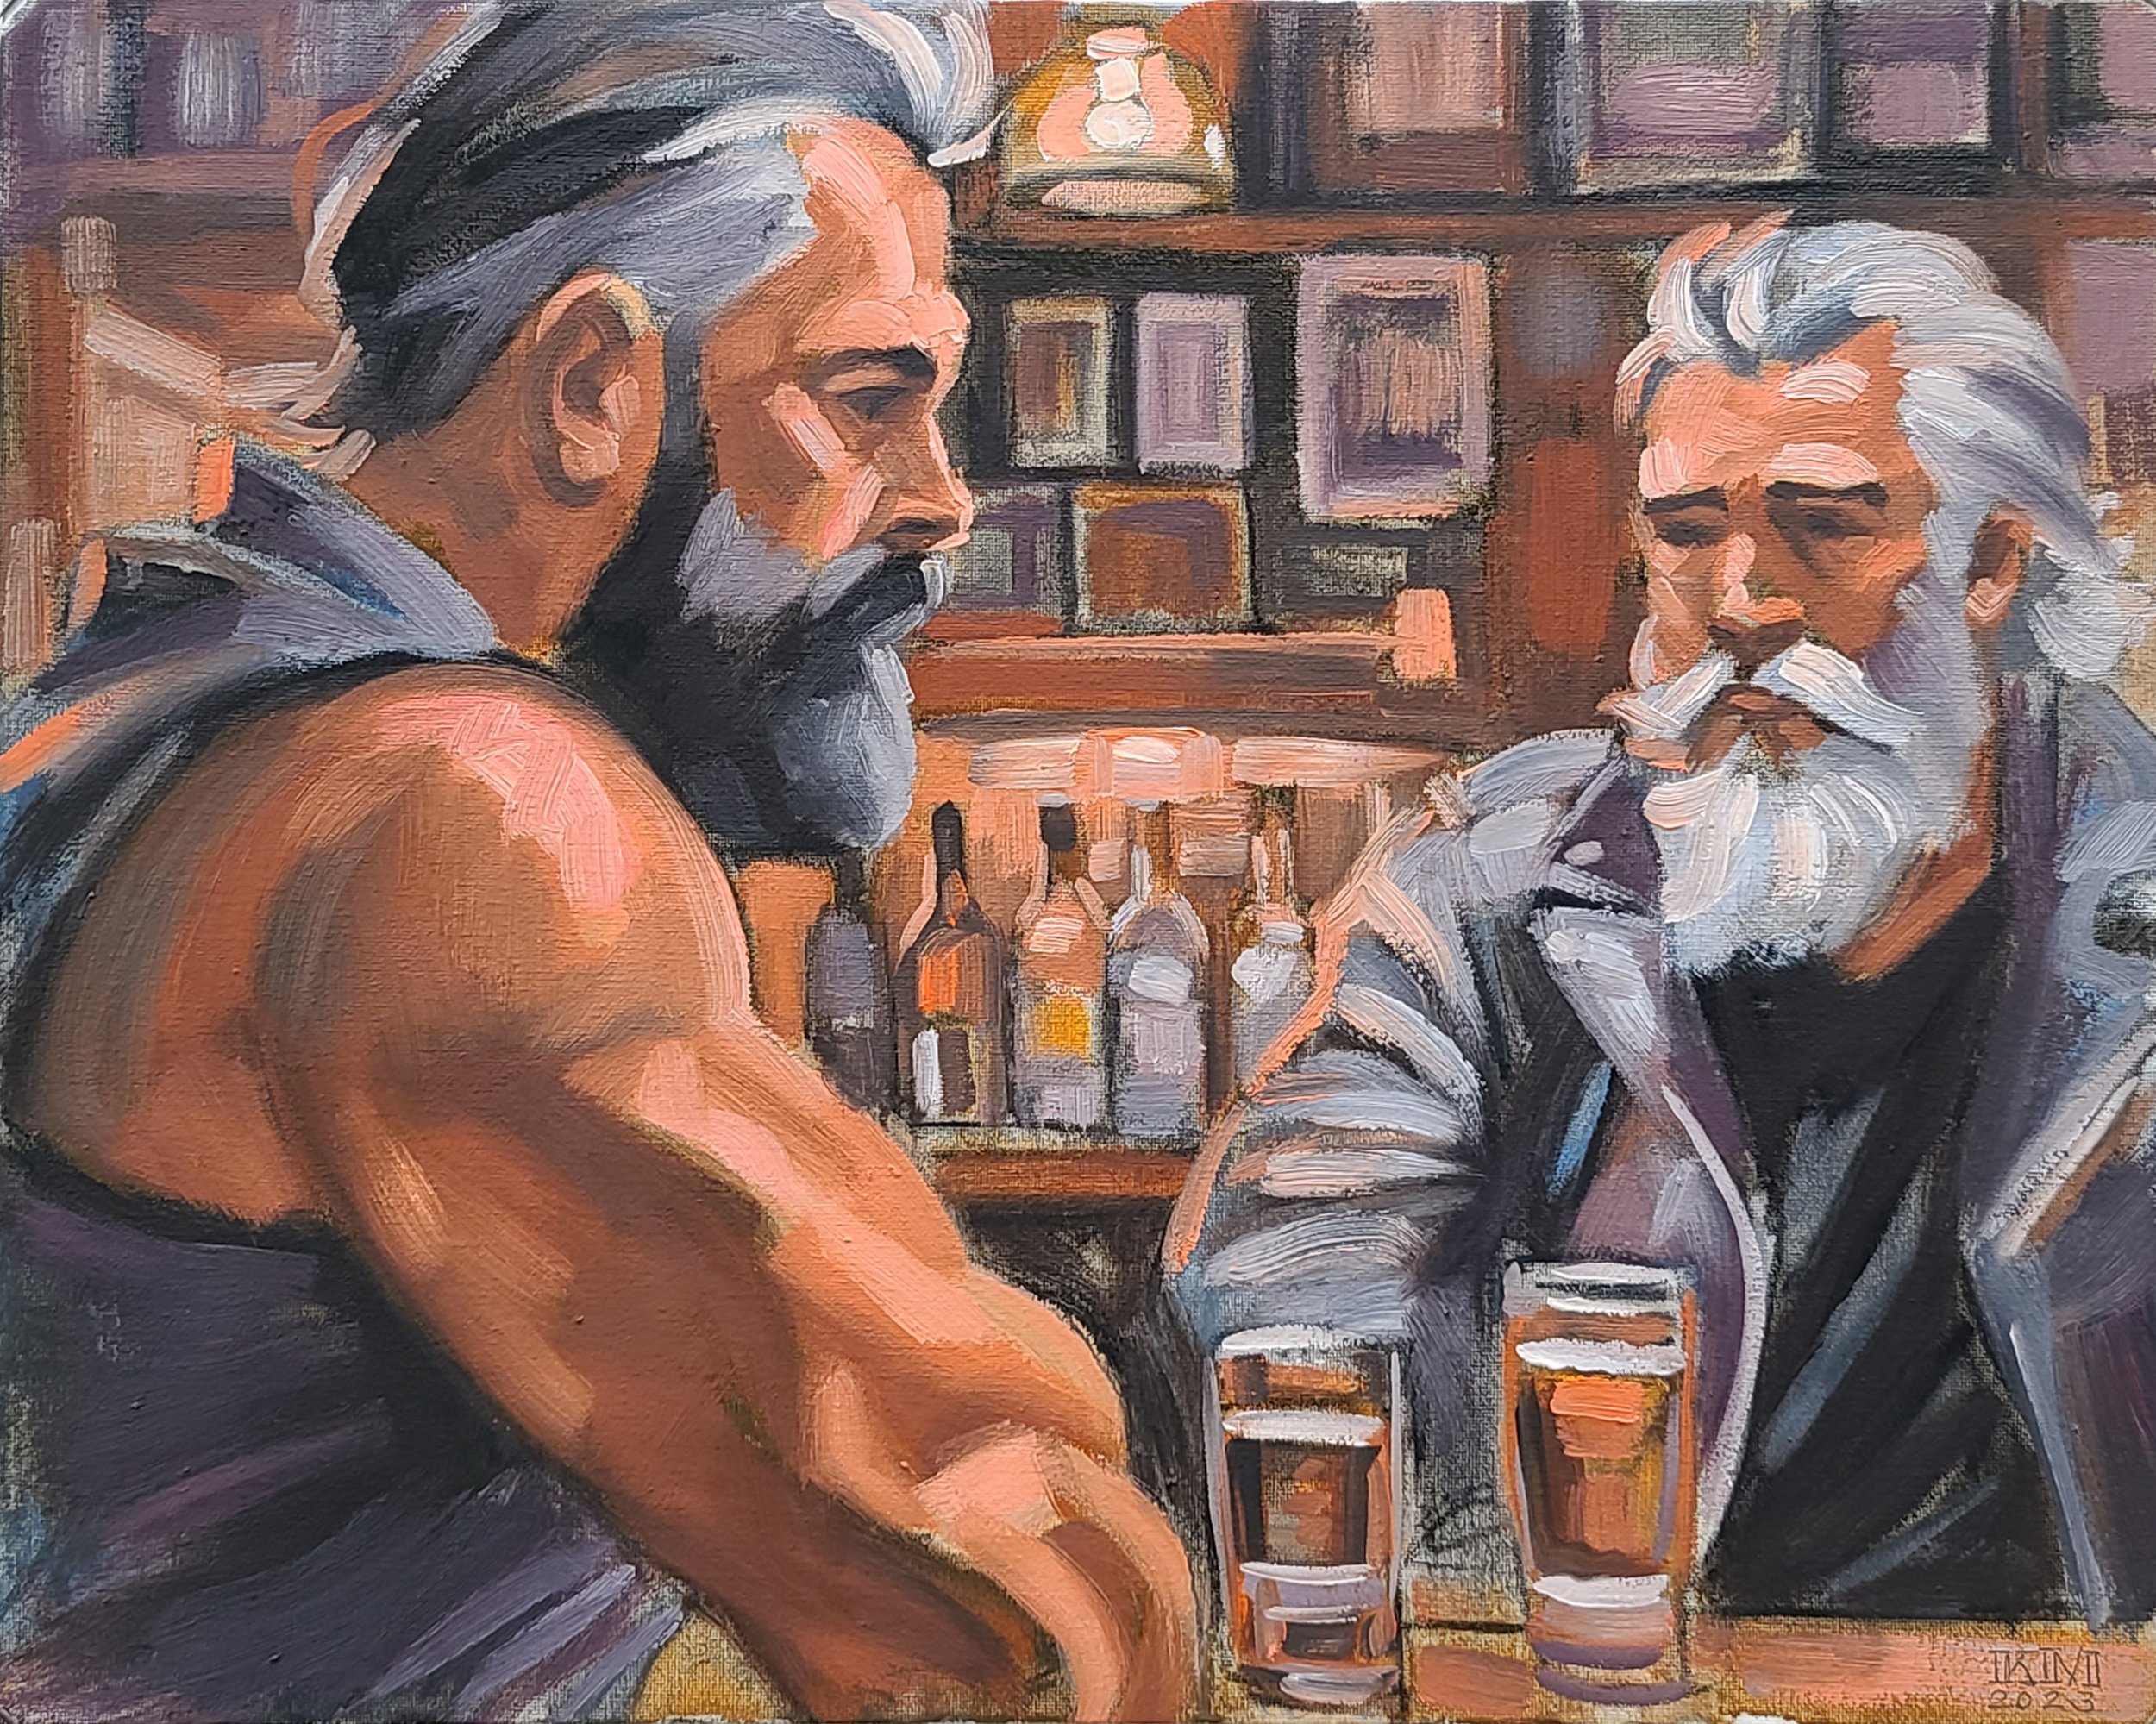 At the Bar, 16x20 inches oil on canvas panel by Kenney Mencher — Kenney  Mencher Artist: Representing the Underrepresented